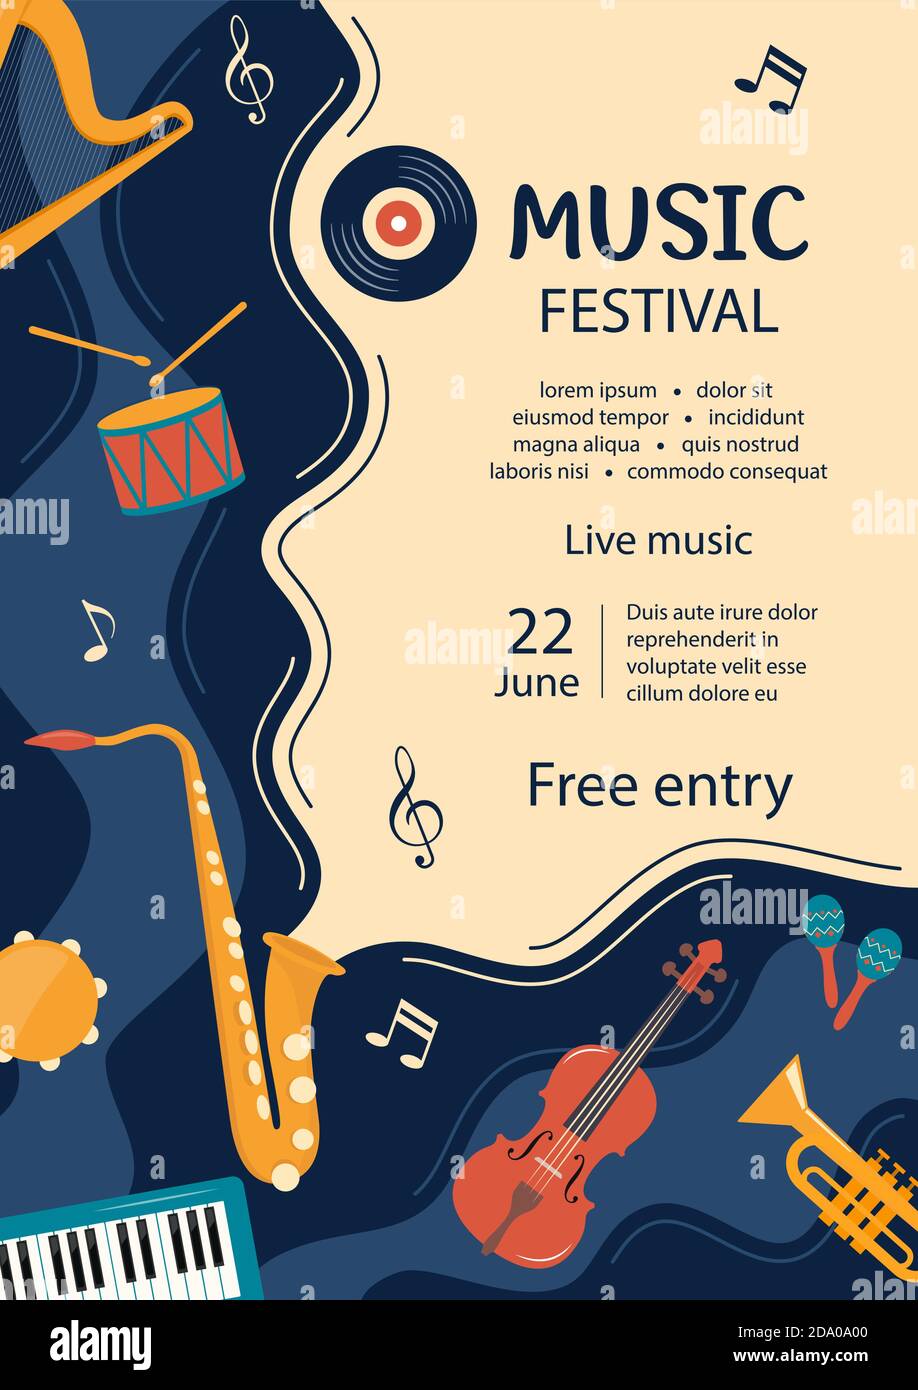 Music festival invitation. Musical flyer, poster template. Musical instruments and vinyl record. Guitar, synthesizer, violin, cello, drum, cymbals, sa Stock Vector